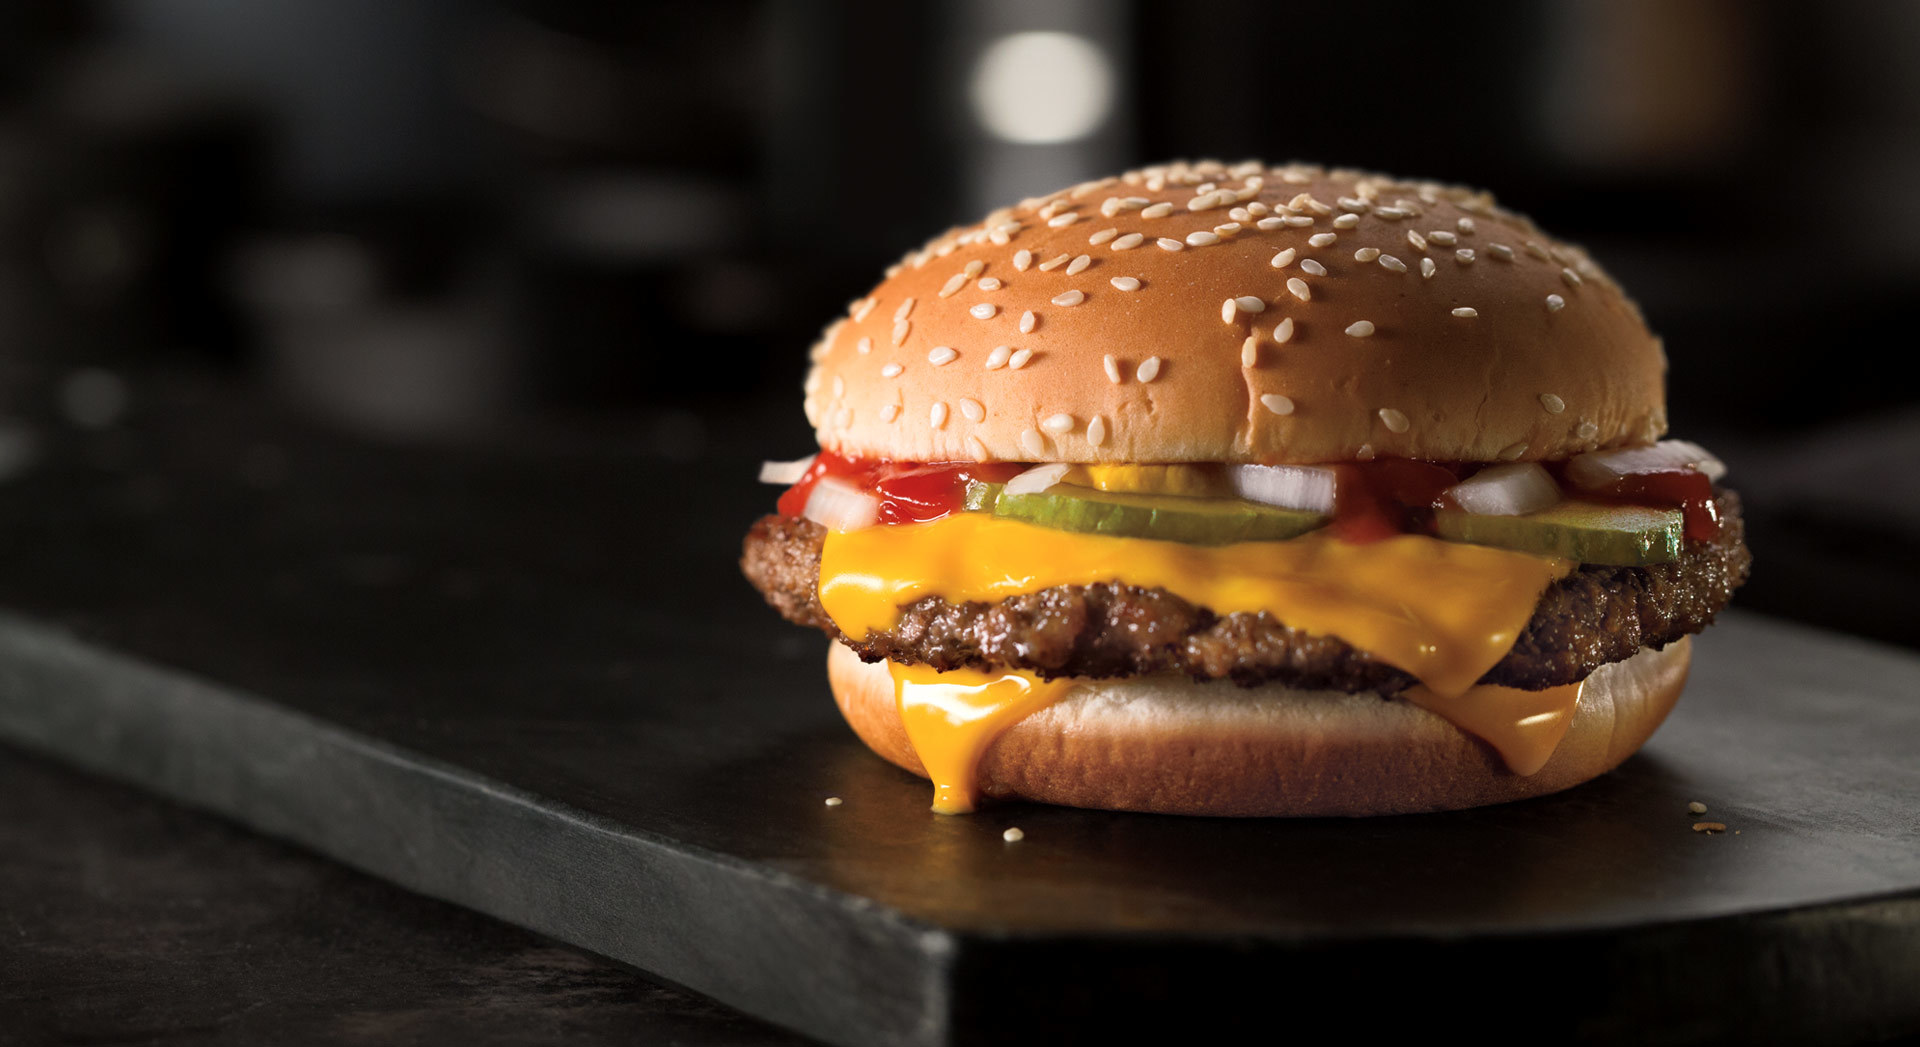 Know Our Food - Is there ammonium hydroxide in McDonald's burgers?